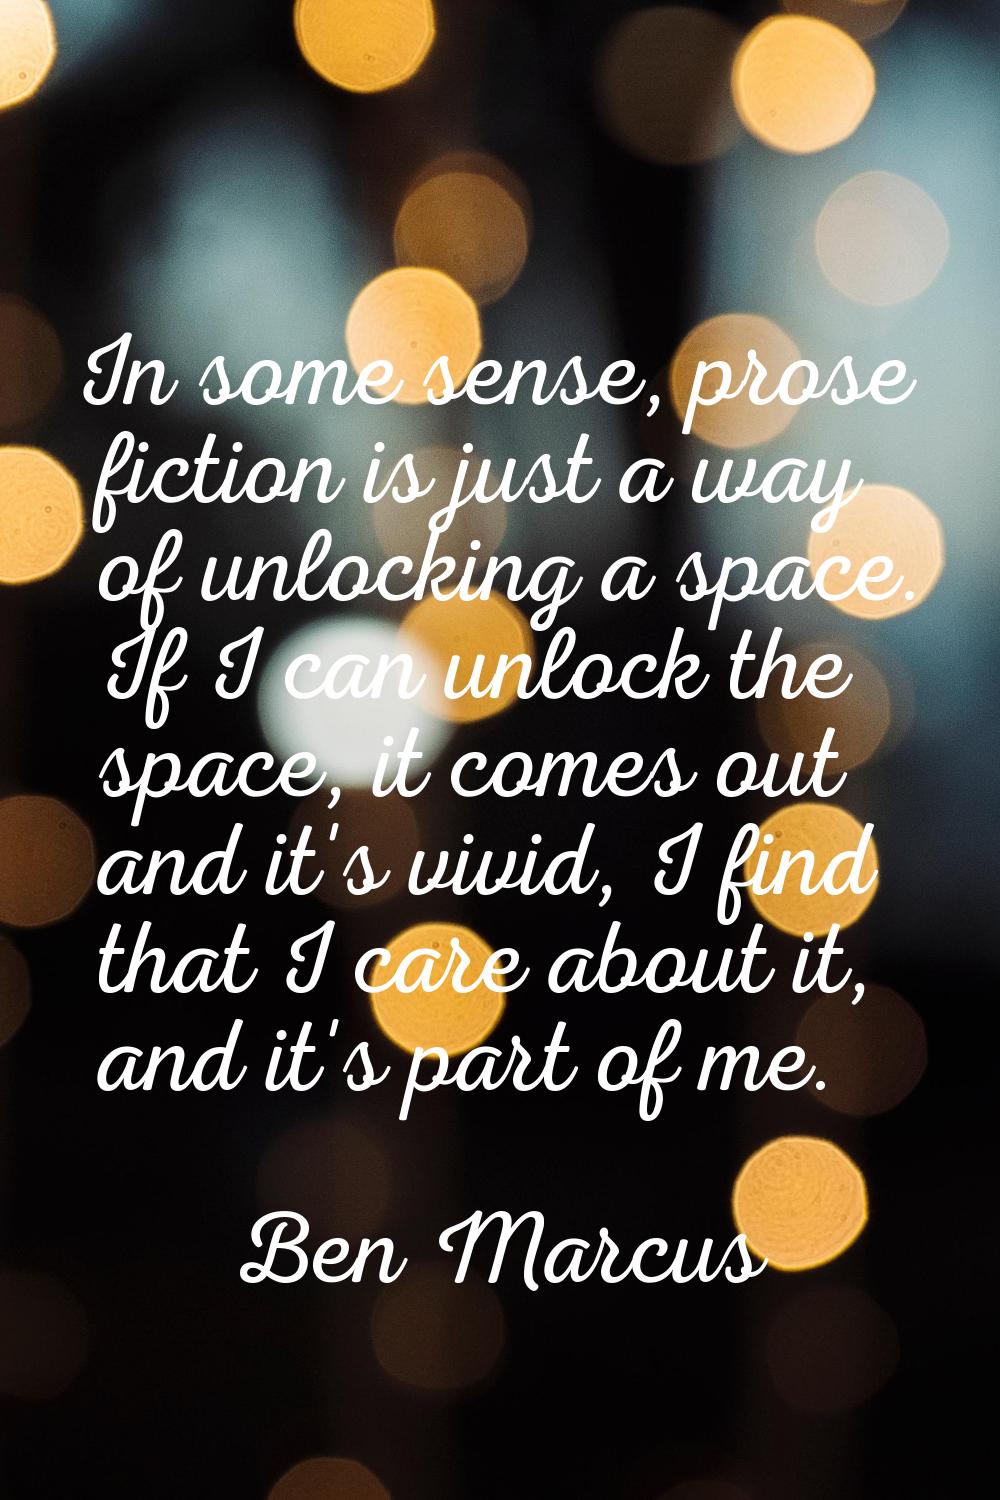 In some sense, prose fiction is just a way of unlocking a space. If I can unlock the space, it come